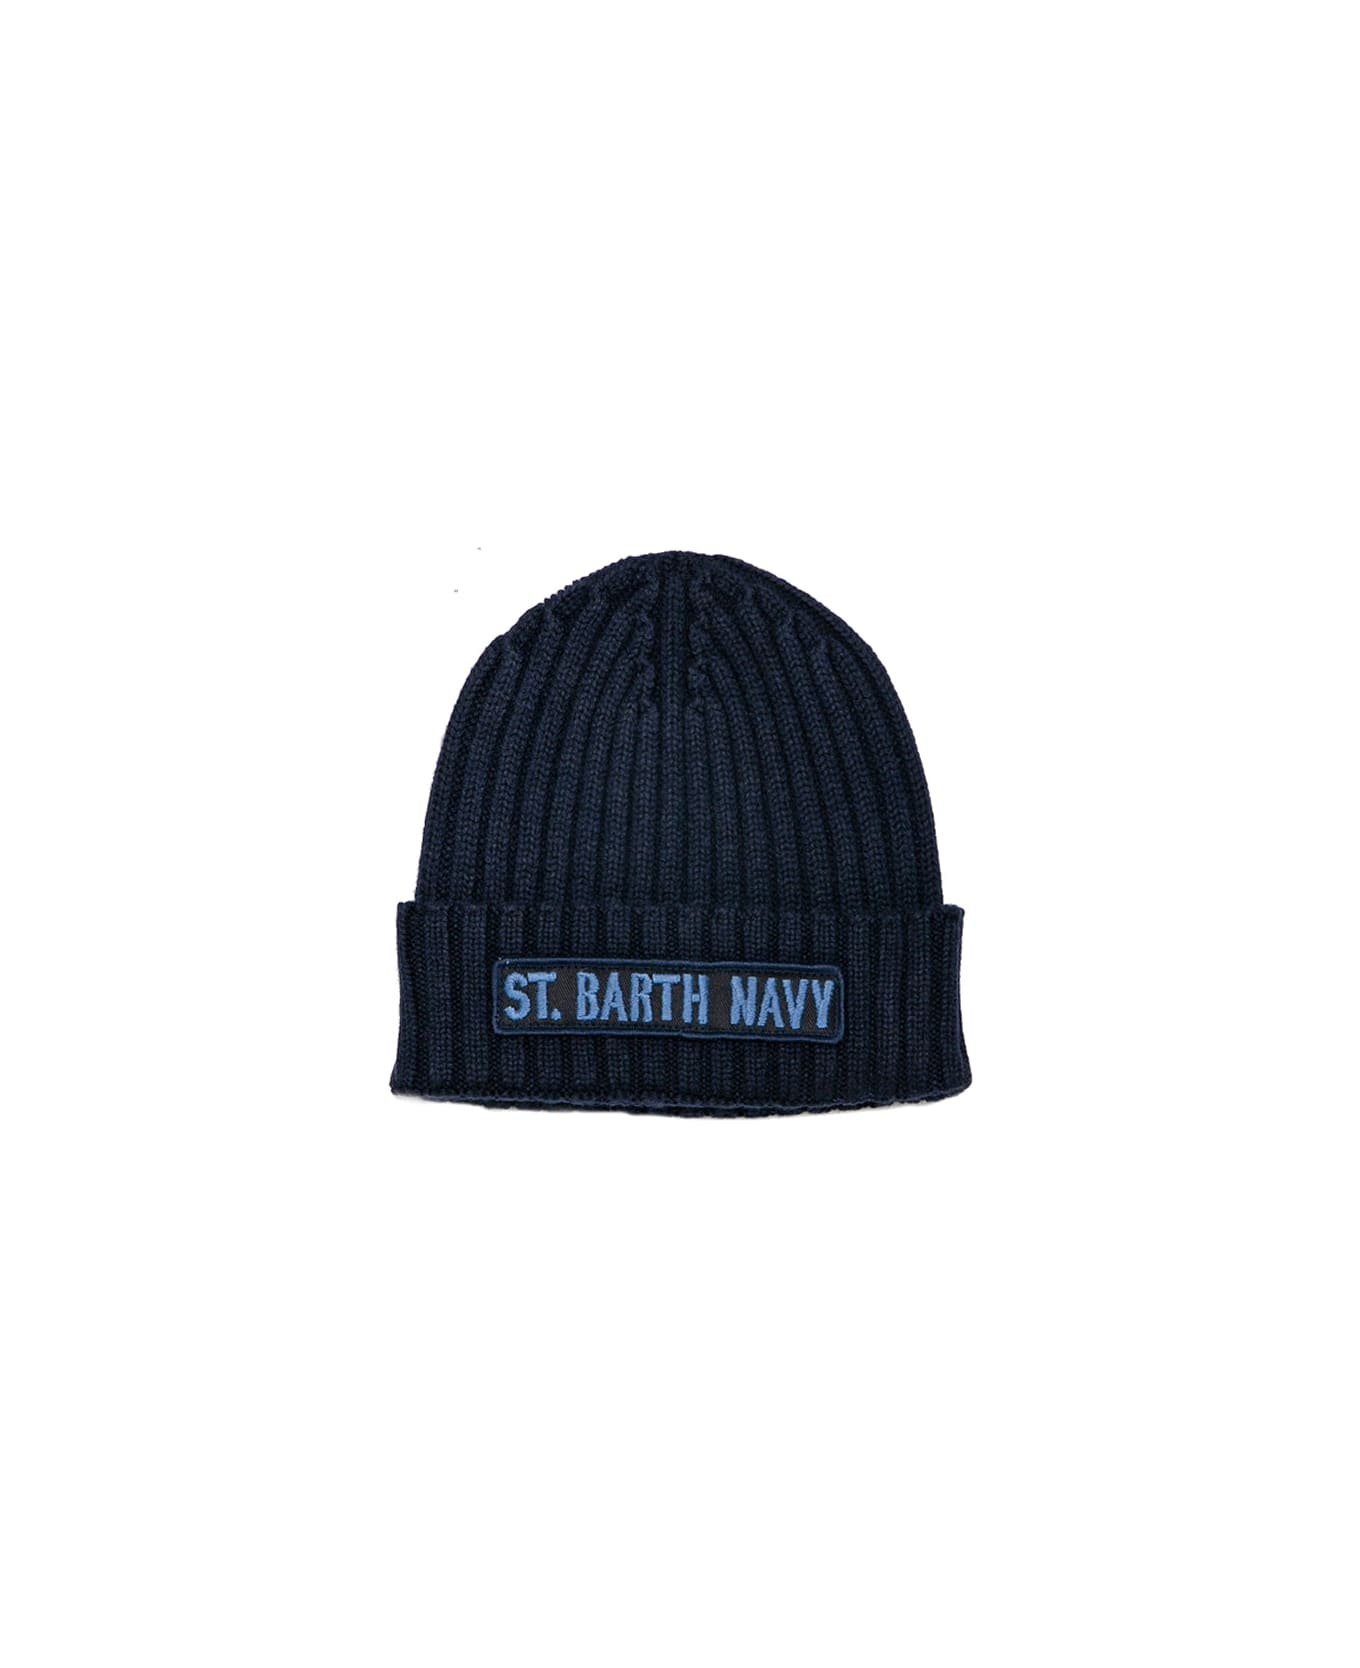 MC2 Saint Barth Blended Cashmere Hat With St. Barth Navy Patch - BLUE